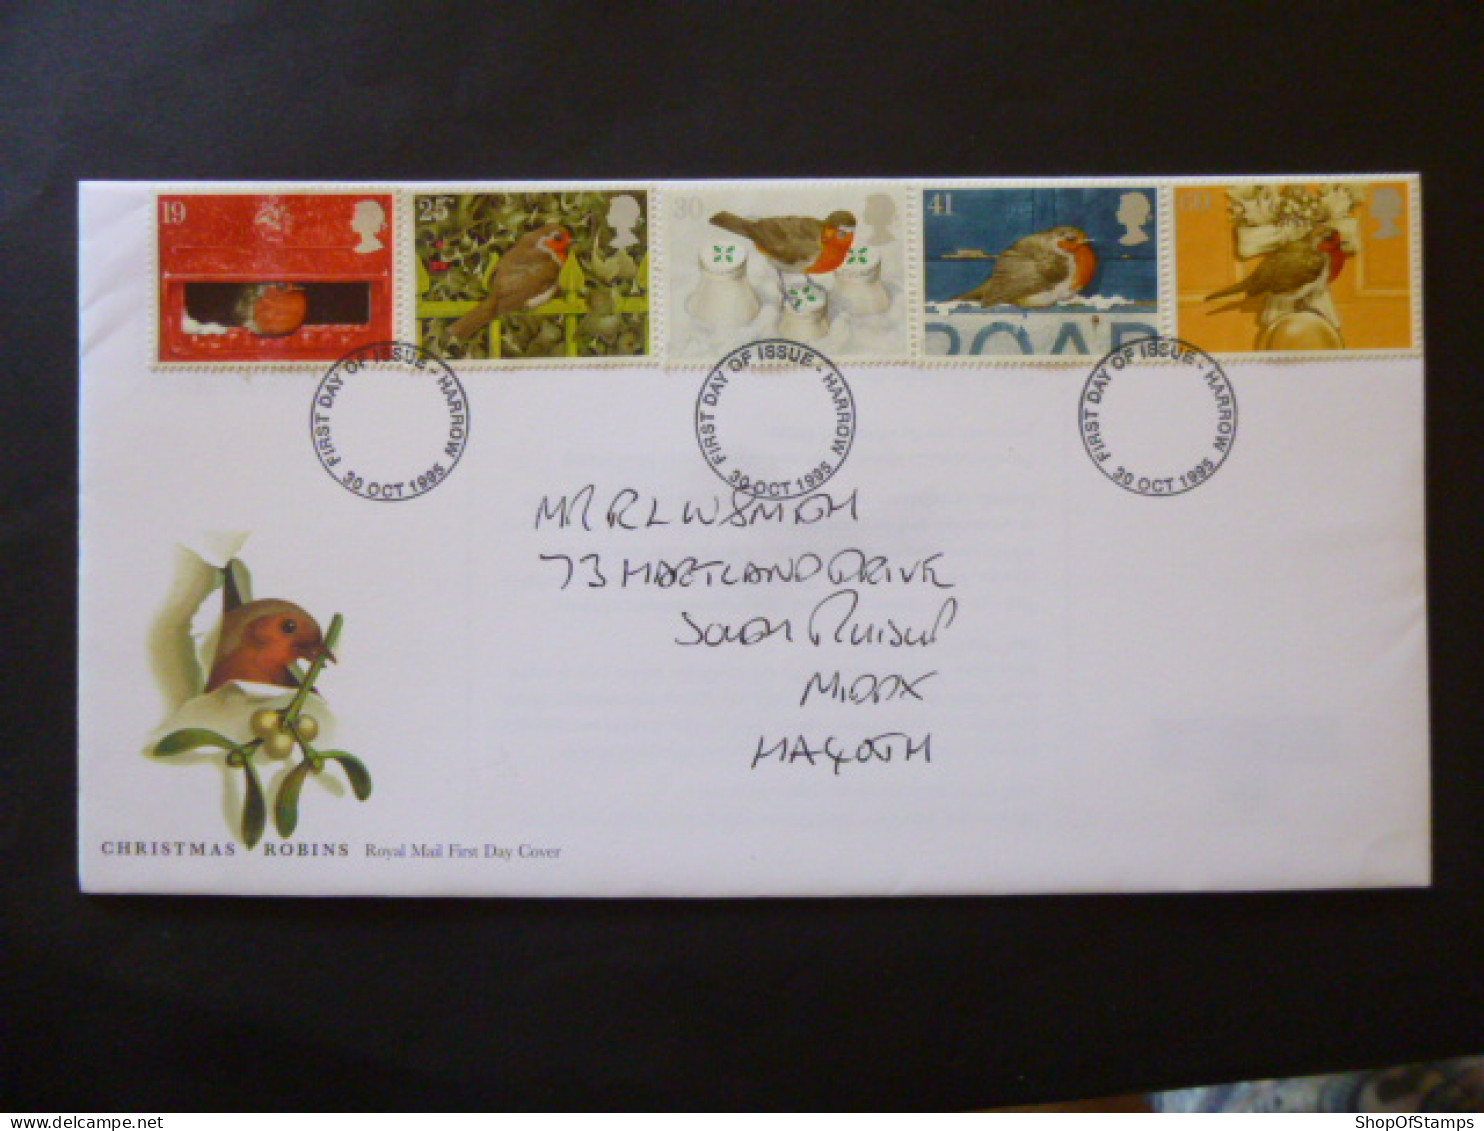 GREAT BRITAIN SG 1896-1900 CHRISTMAS ROBINS FDC HARROW - Unclassified